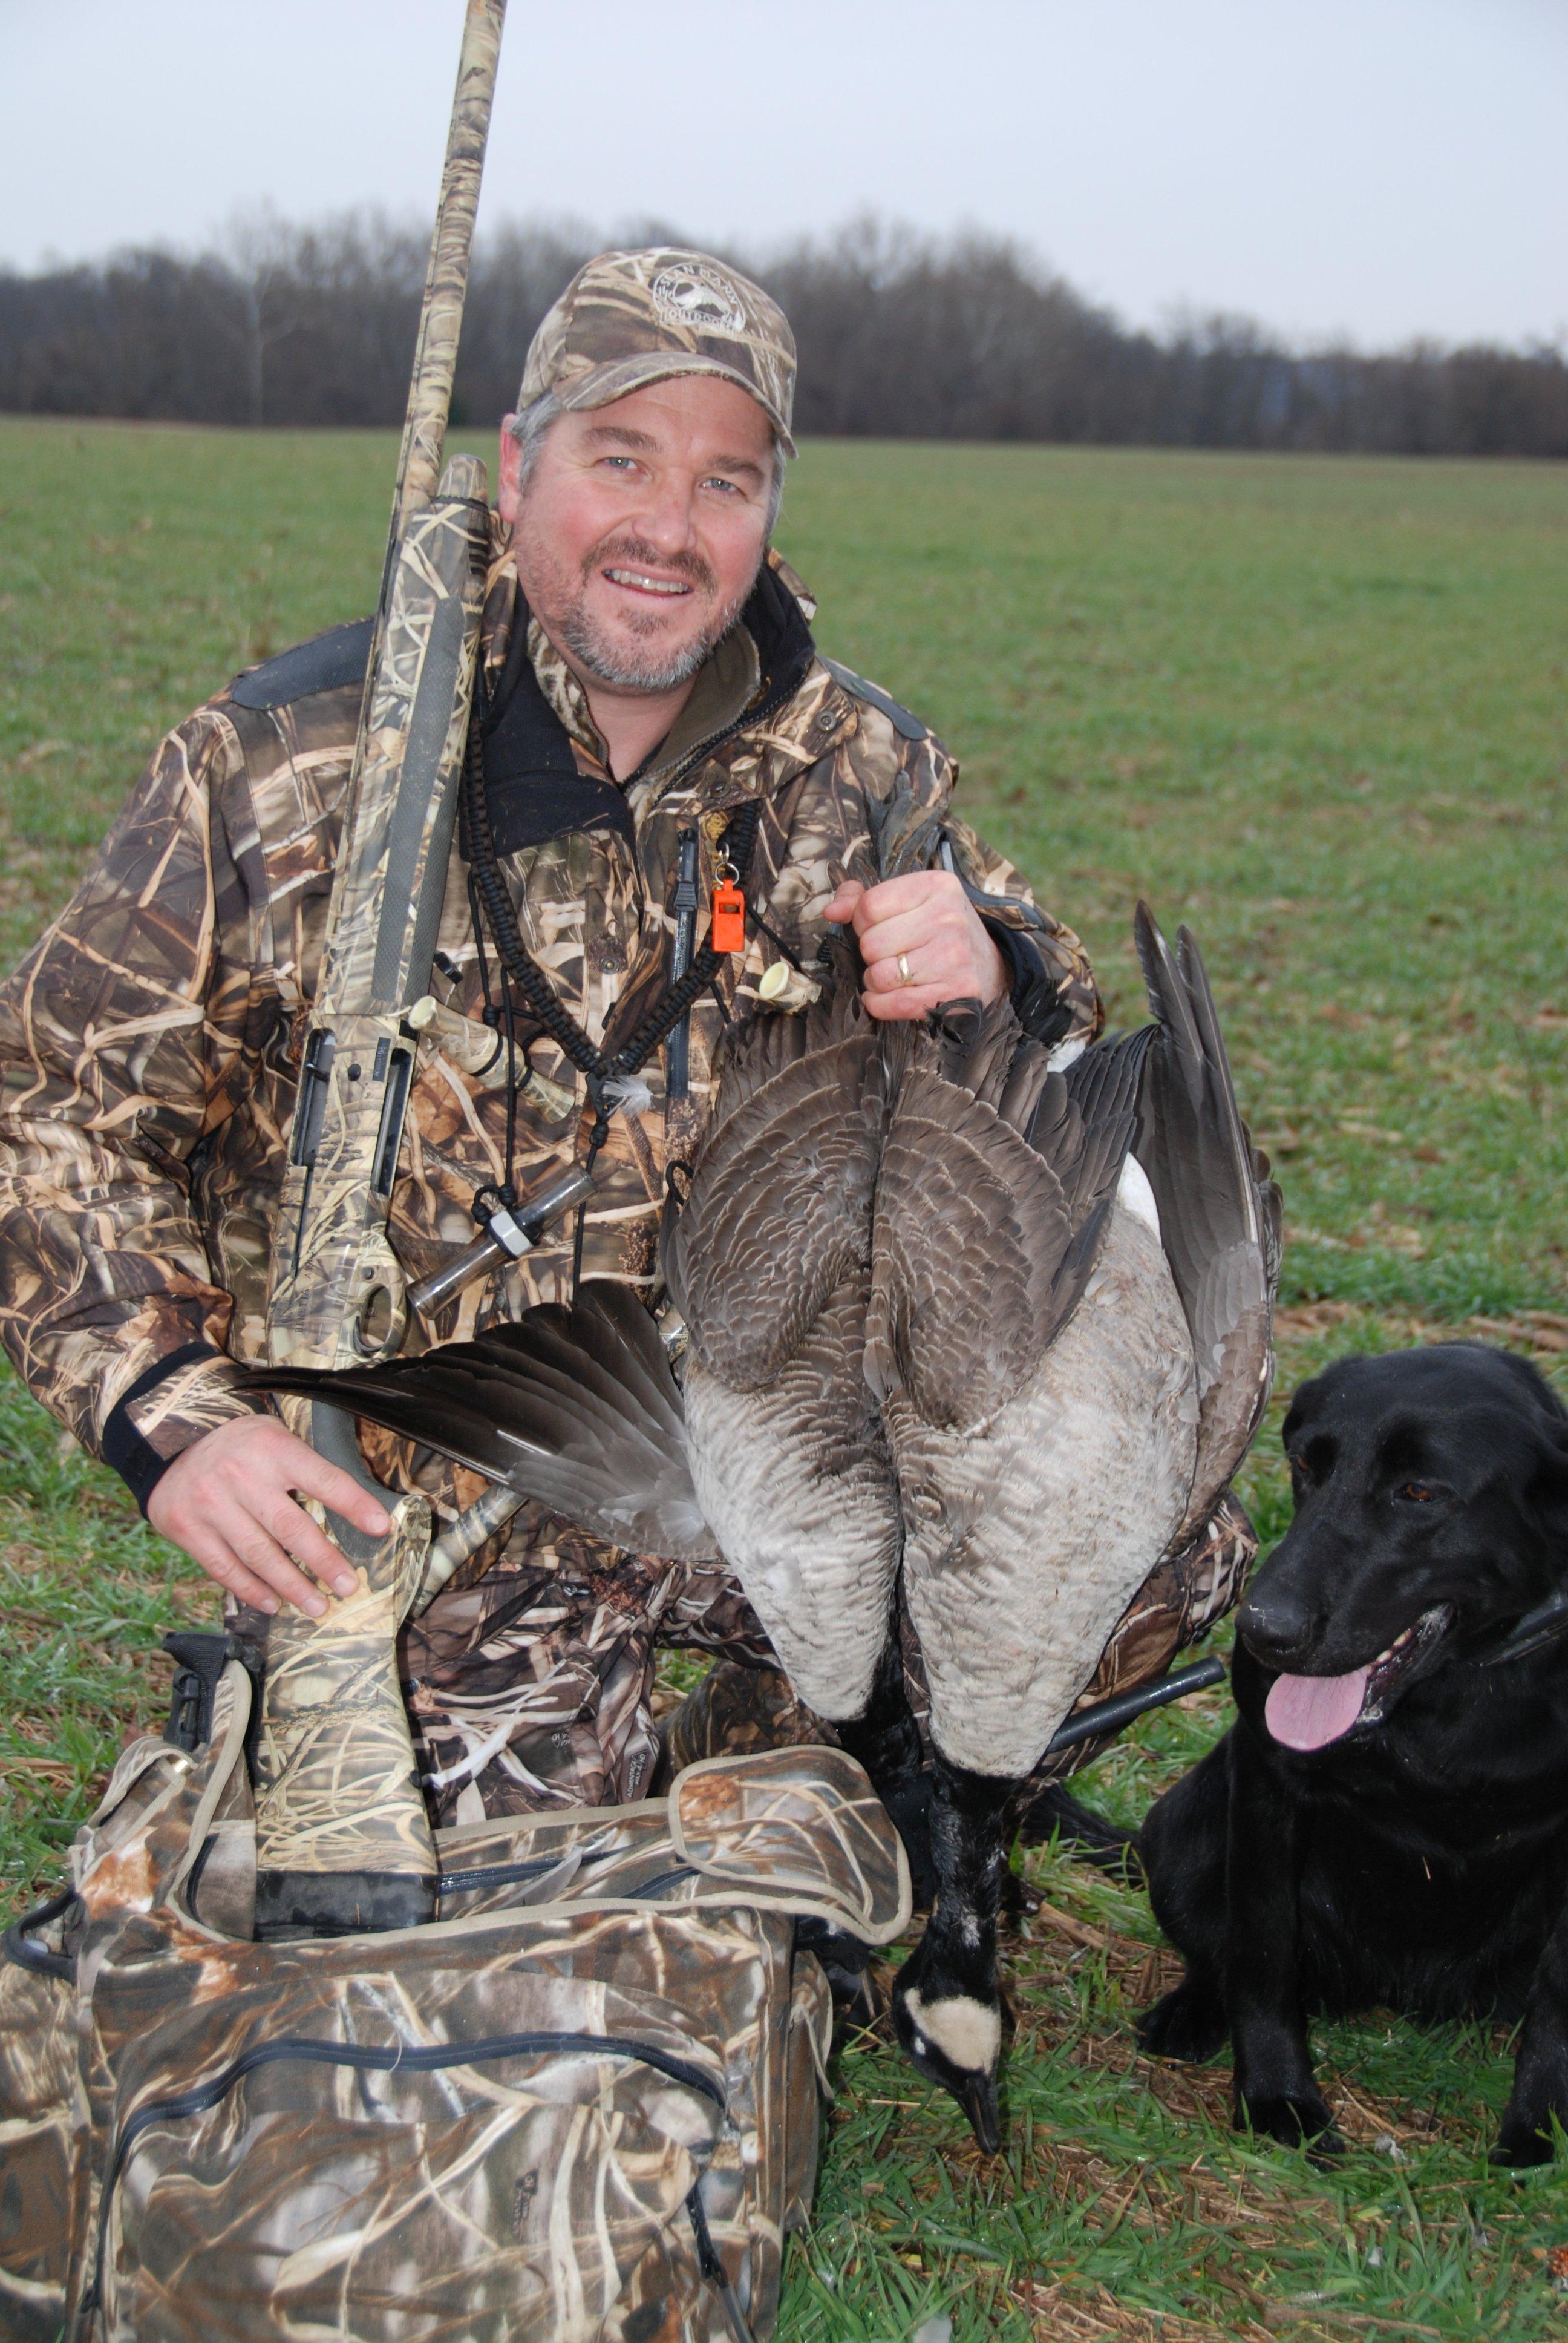 Sean Mann's love of duck and goose hunting began when he was young. That passion continues today. Photo © Sean Mann